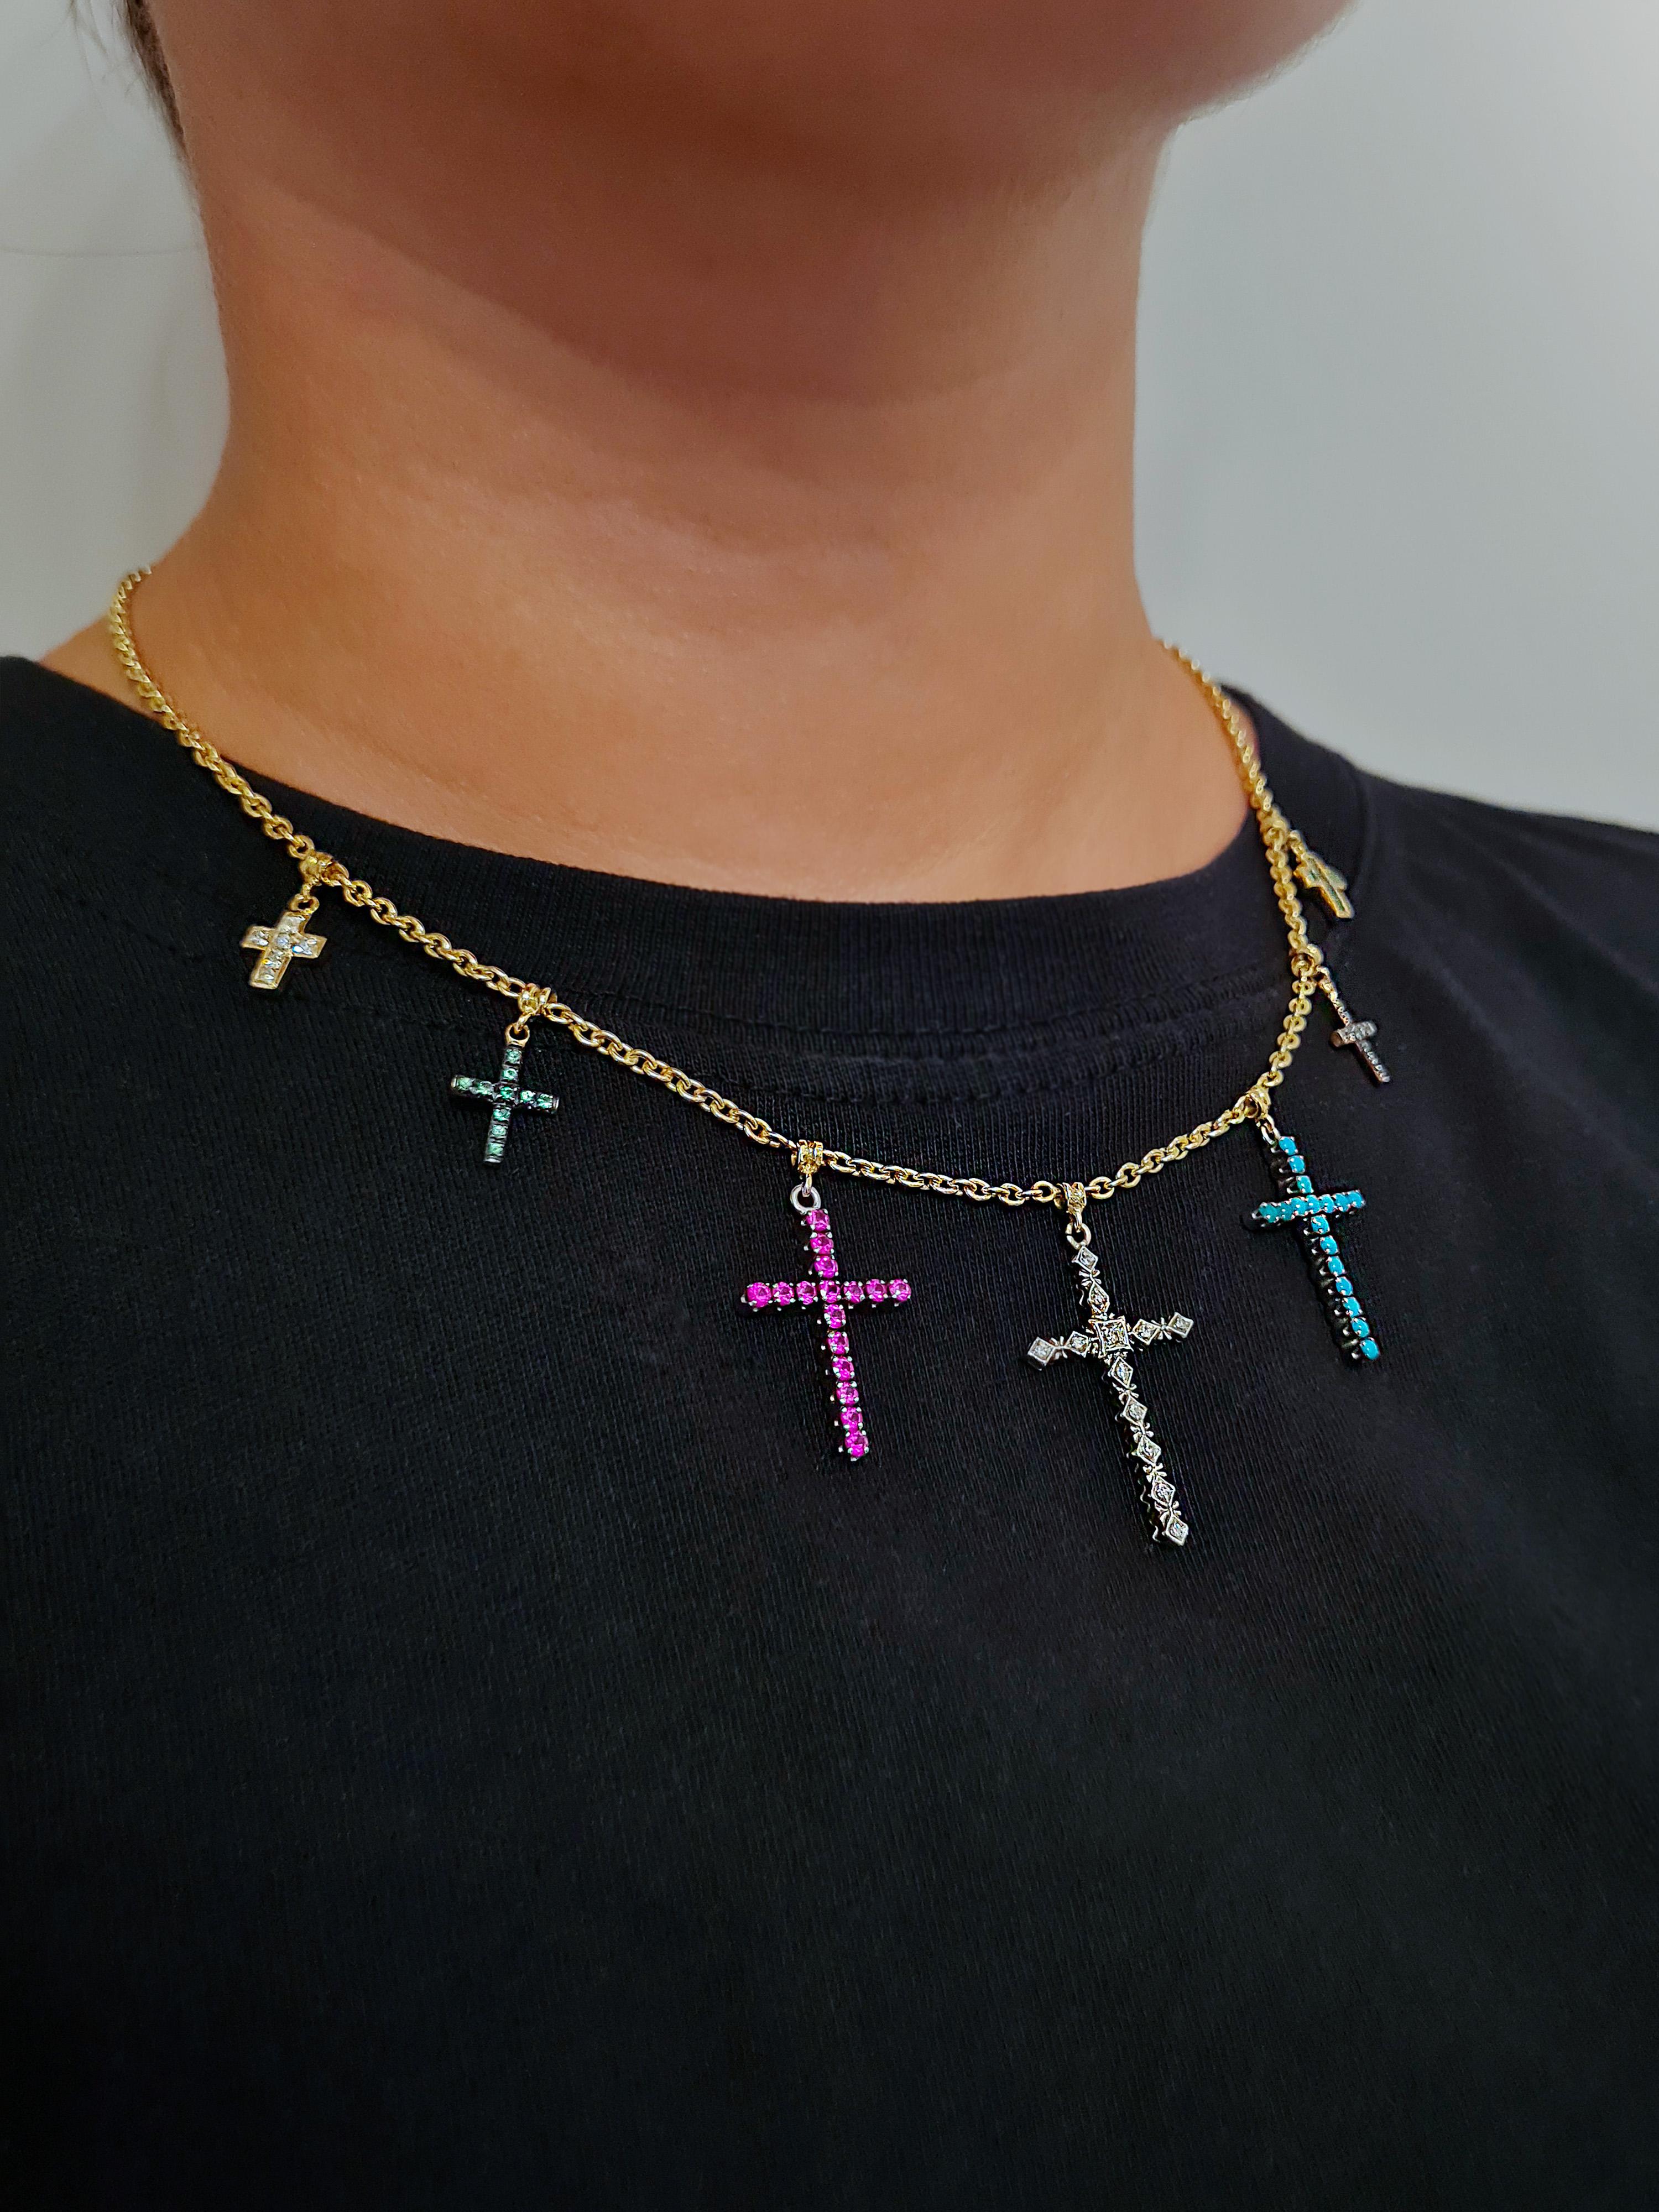 18KT Gold Necklace with 7 Multicolored Vintage Crosses For Sale 2